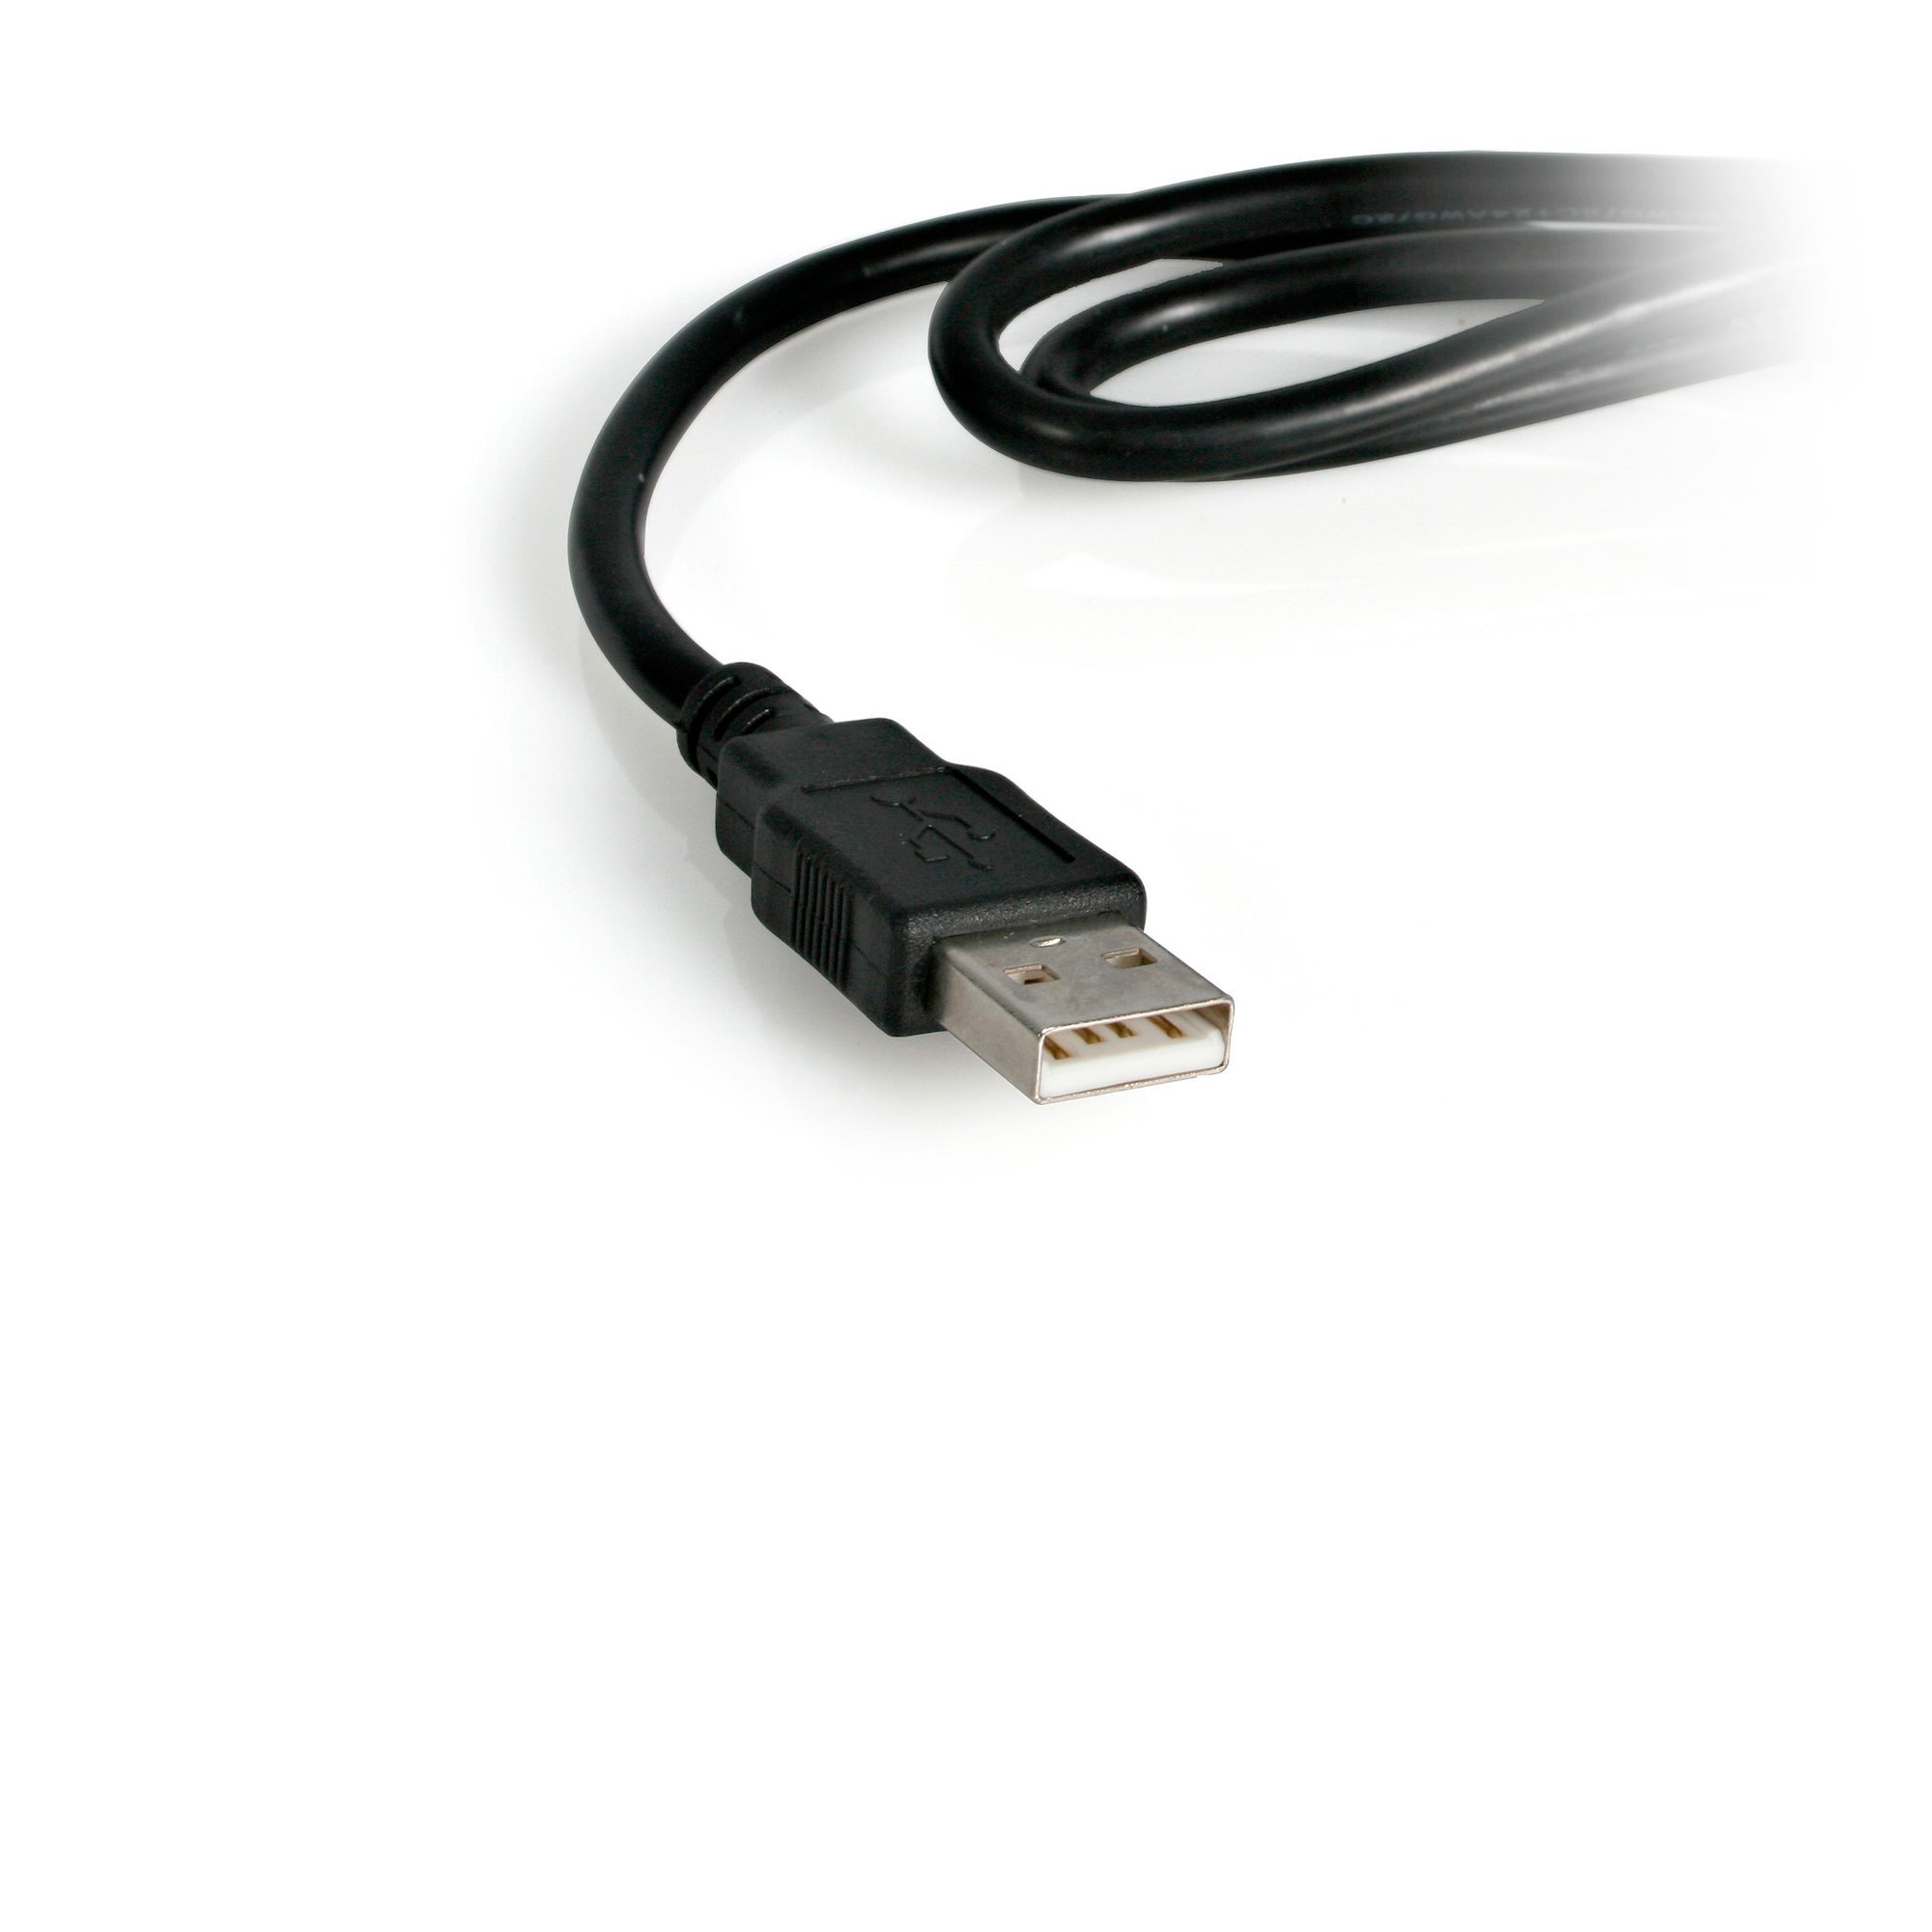 USB Video Capture Adapter Cable - S-Video/Composite to USB 2.0 SD Video  Capture Device Cable - TWAIN Support - Analog to Digital Converter for  Media